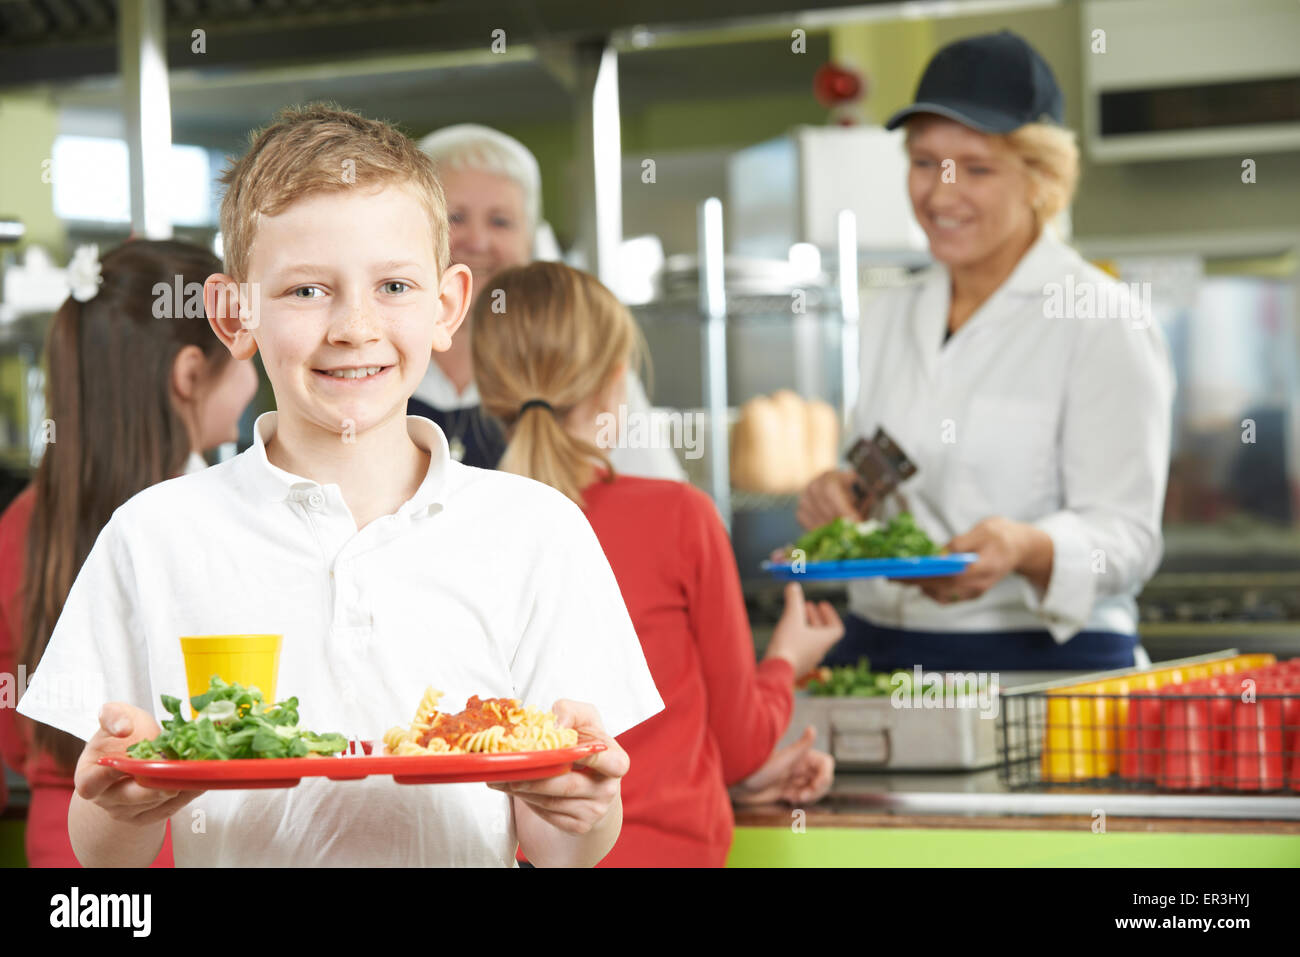 Male Pupil With Healthy Lunch In School Cafeteria Stock Photo